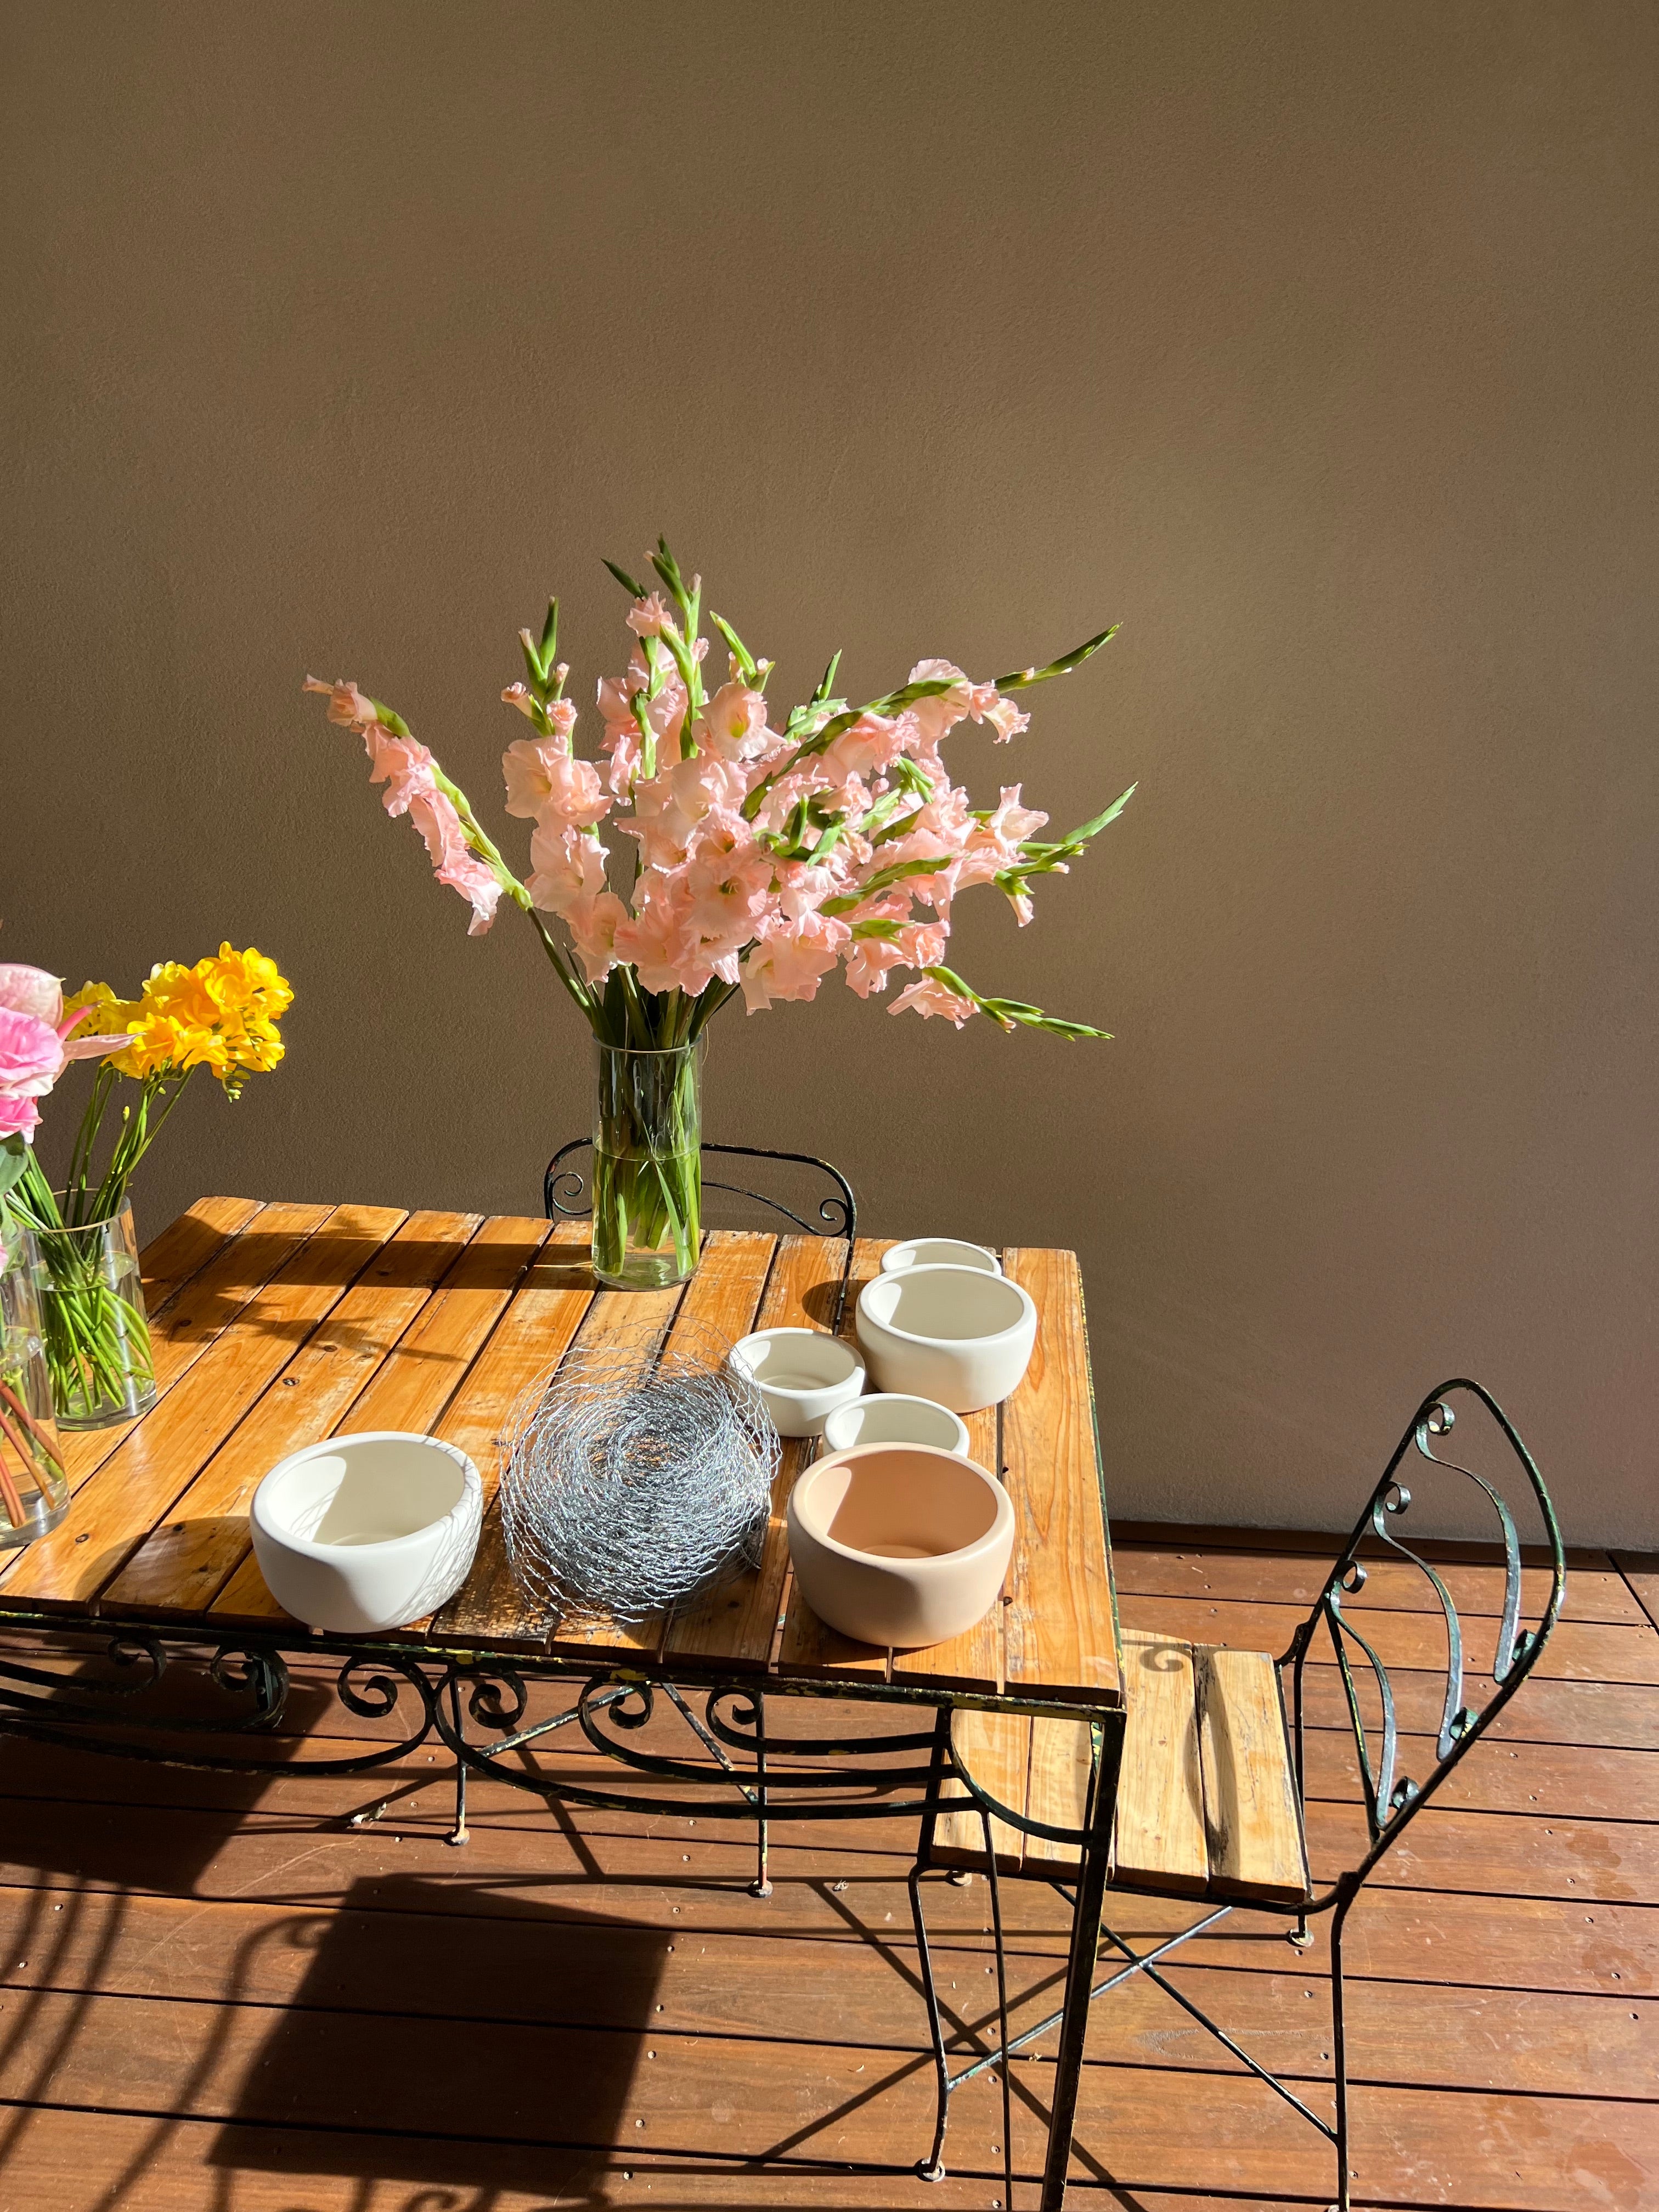 wooden table with ceramic bowls and a vase of pink flowers and chicken wire roll